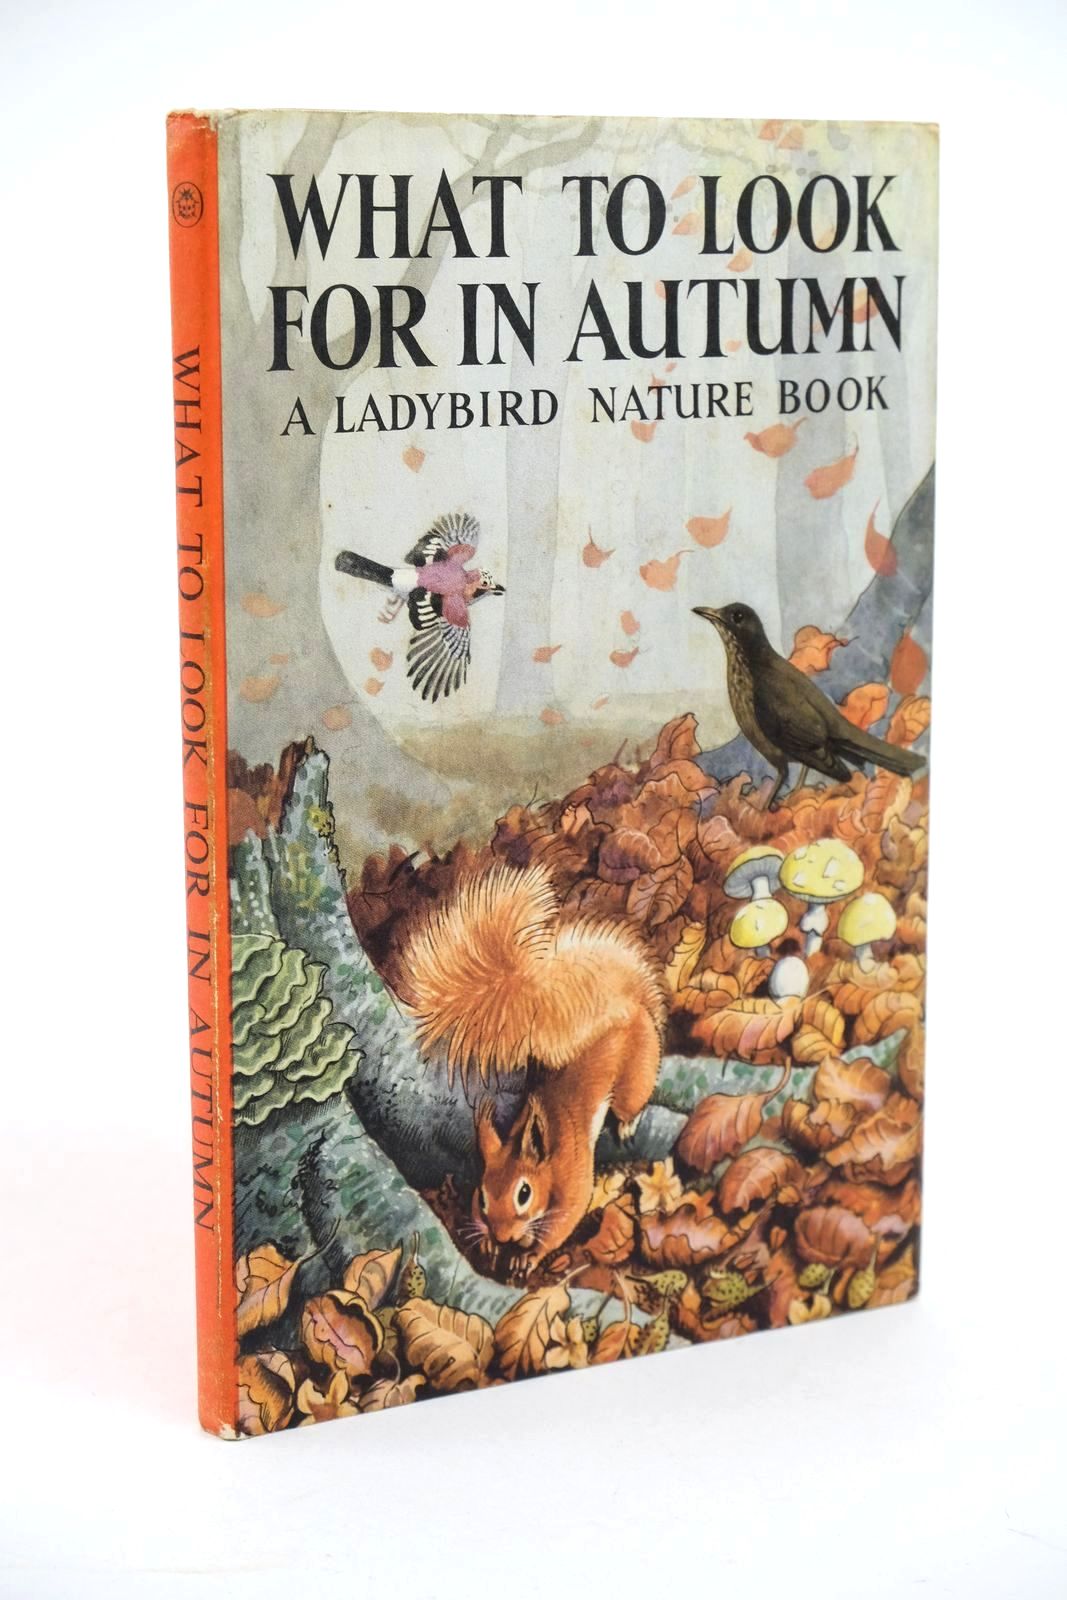 Photo of WHAT TO LOOK FOR IN AUTUMN written by Watson, E.L. Grant illustrated by Tunnicliffe, C.F. published by Wills &amp; Hepworth Ltd. (STOCK CODE: 1323144)  for sale by Stella & Rose's Books